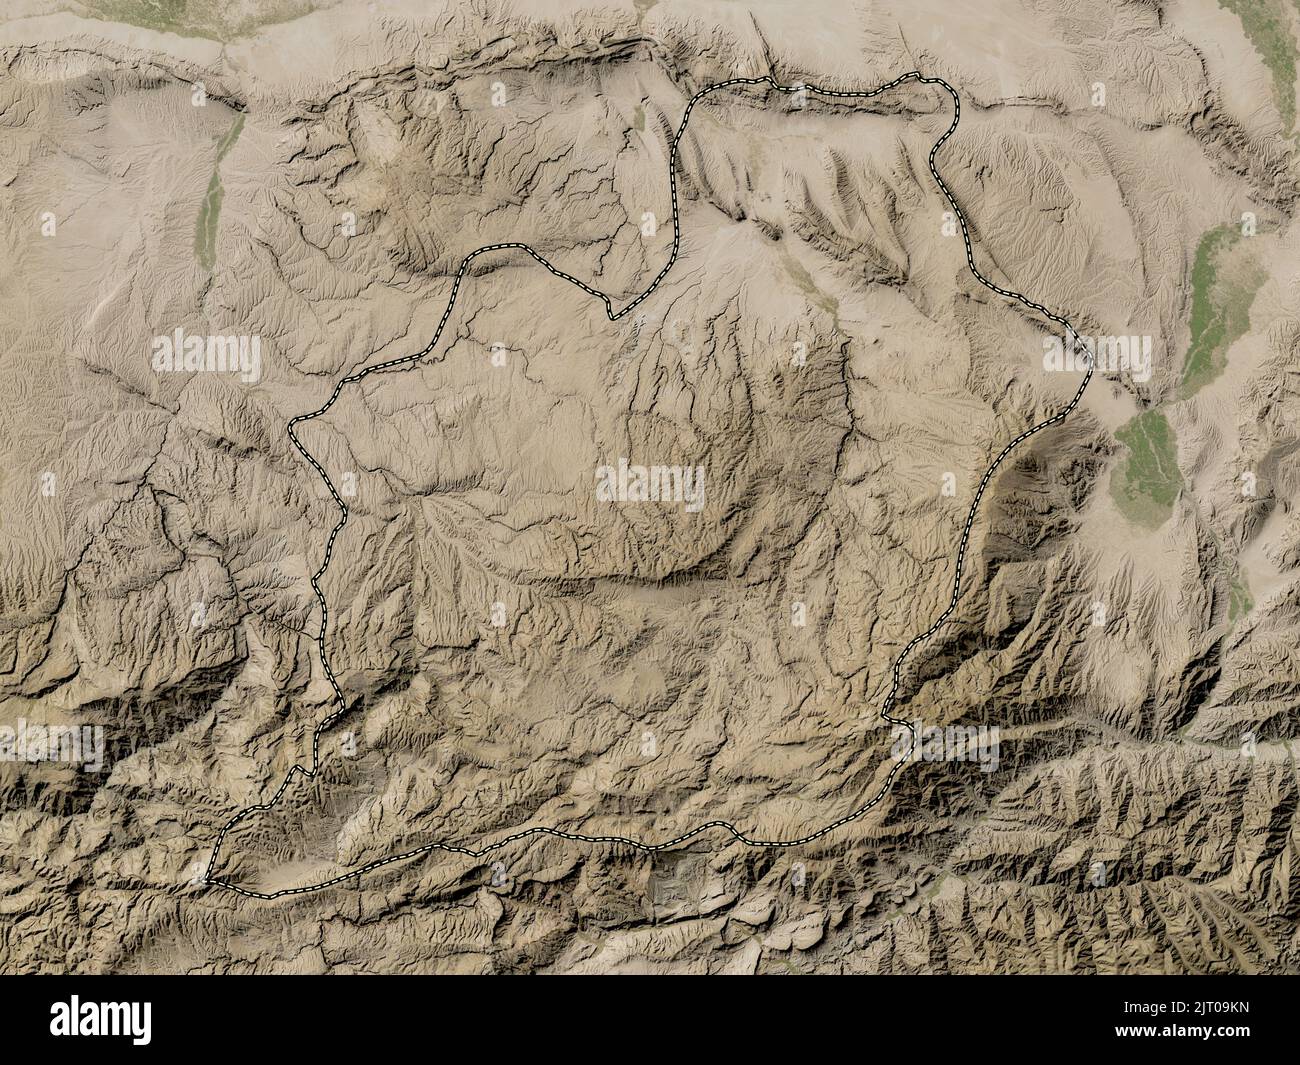 Samangan, province of Afghanistan. Low resolution satellite map Stock Photo